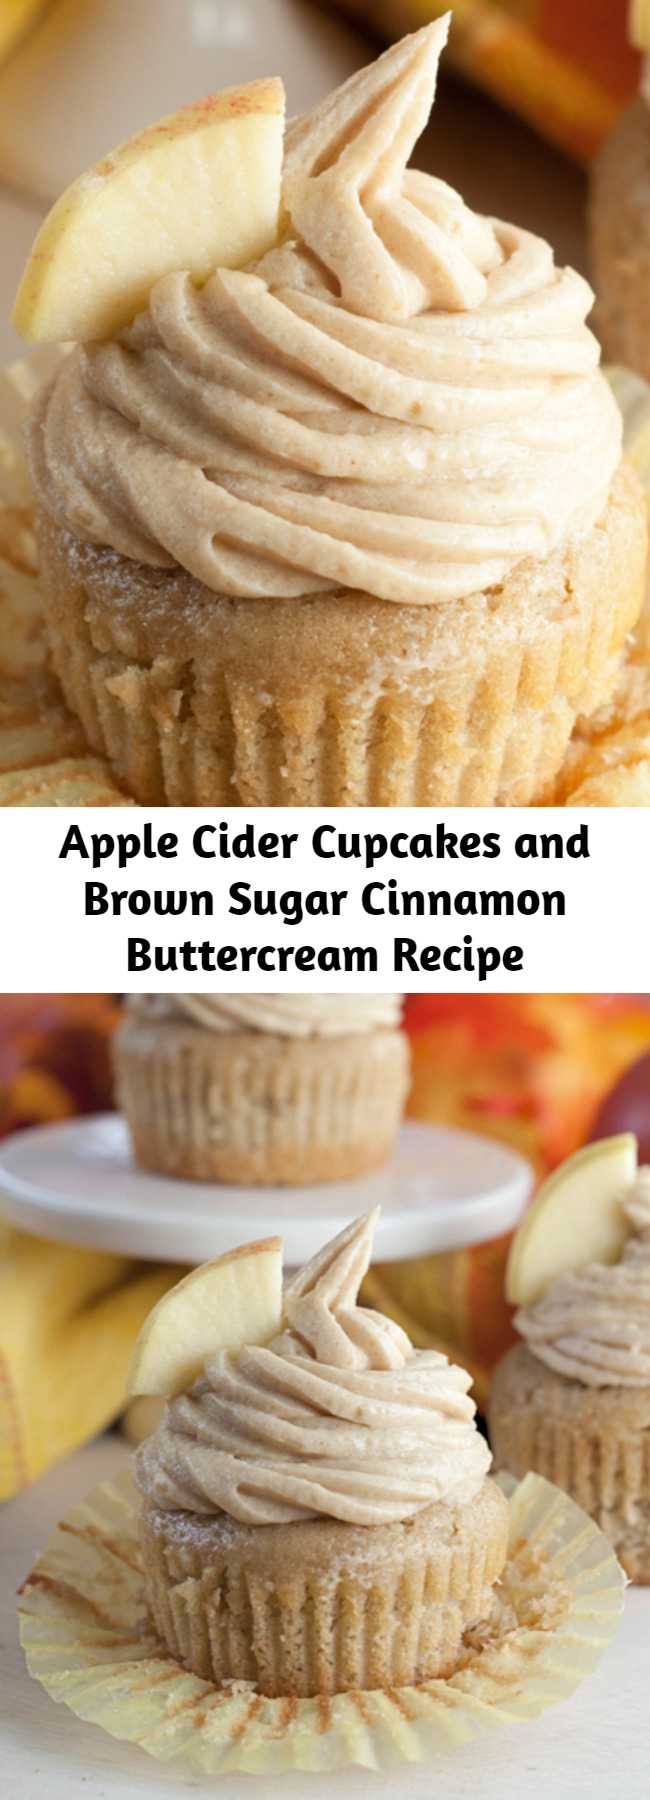 Apple Cider Cupcakes and Brown Sugar Cinnamon Buttercream Recipe - Moist and flavorful recipe for Apple Cider Cupcakes made from scratch with Brown Sugar Cinnamon Buttercream Frosting makes for a mouthwatering fall dessert!